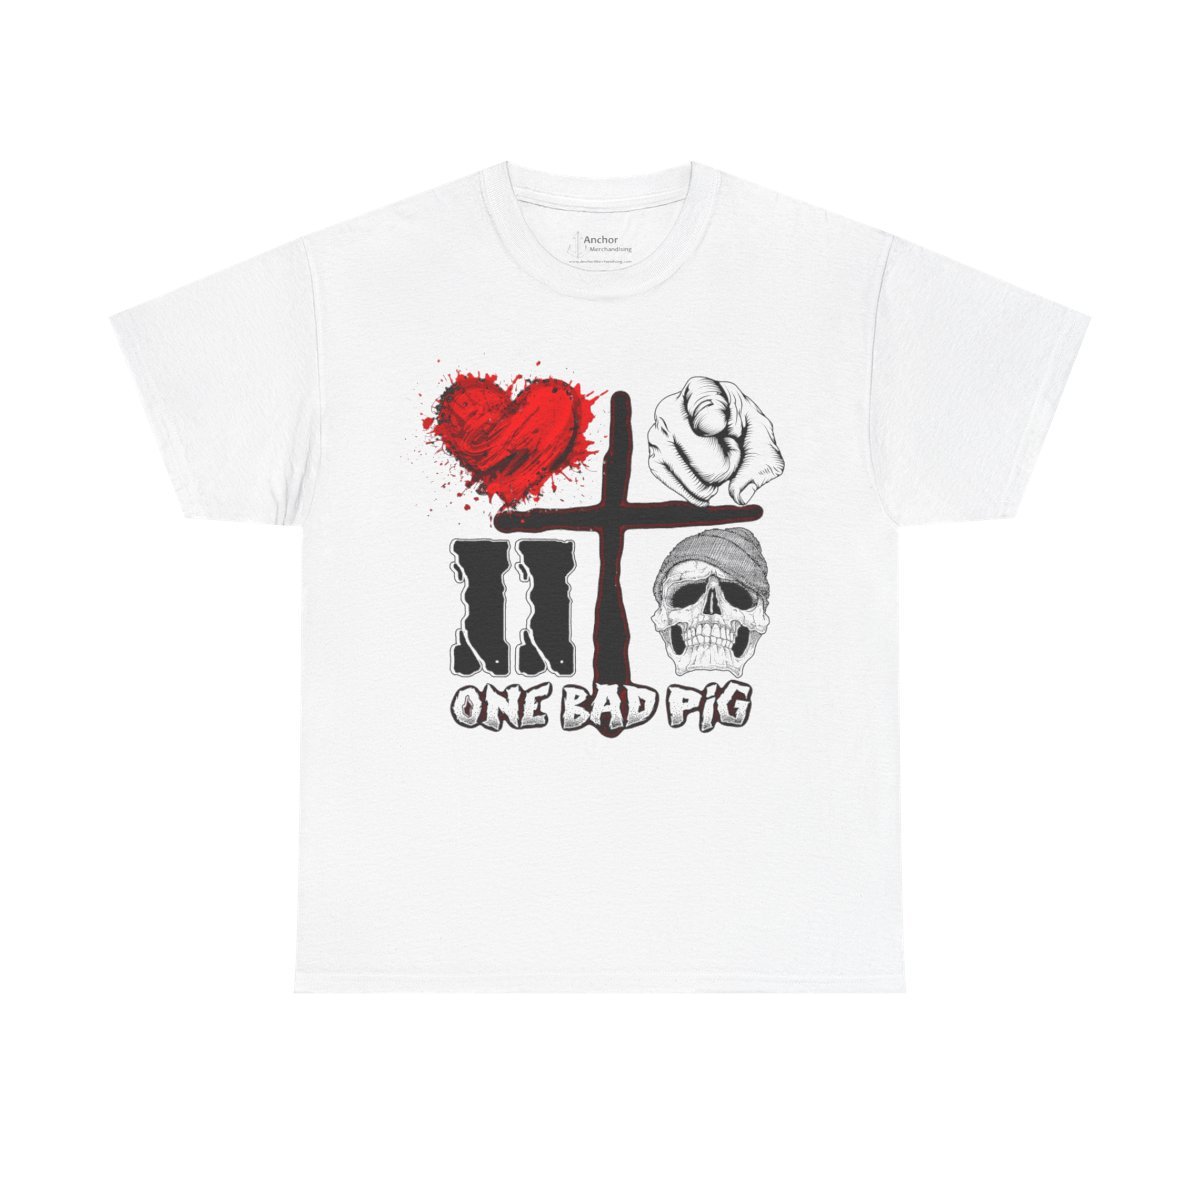 One Bad Pig – Love You To Death V2 Short Sleeve Tshirt